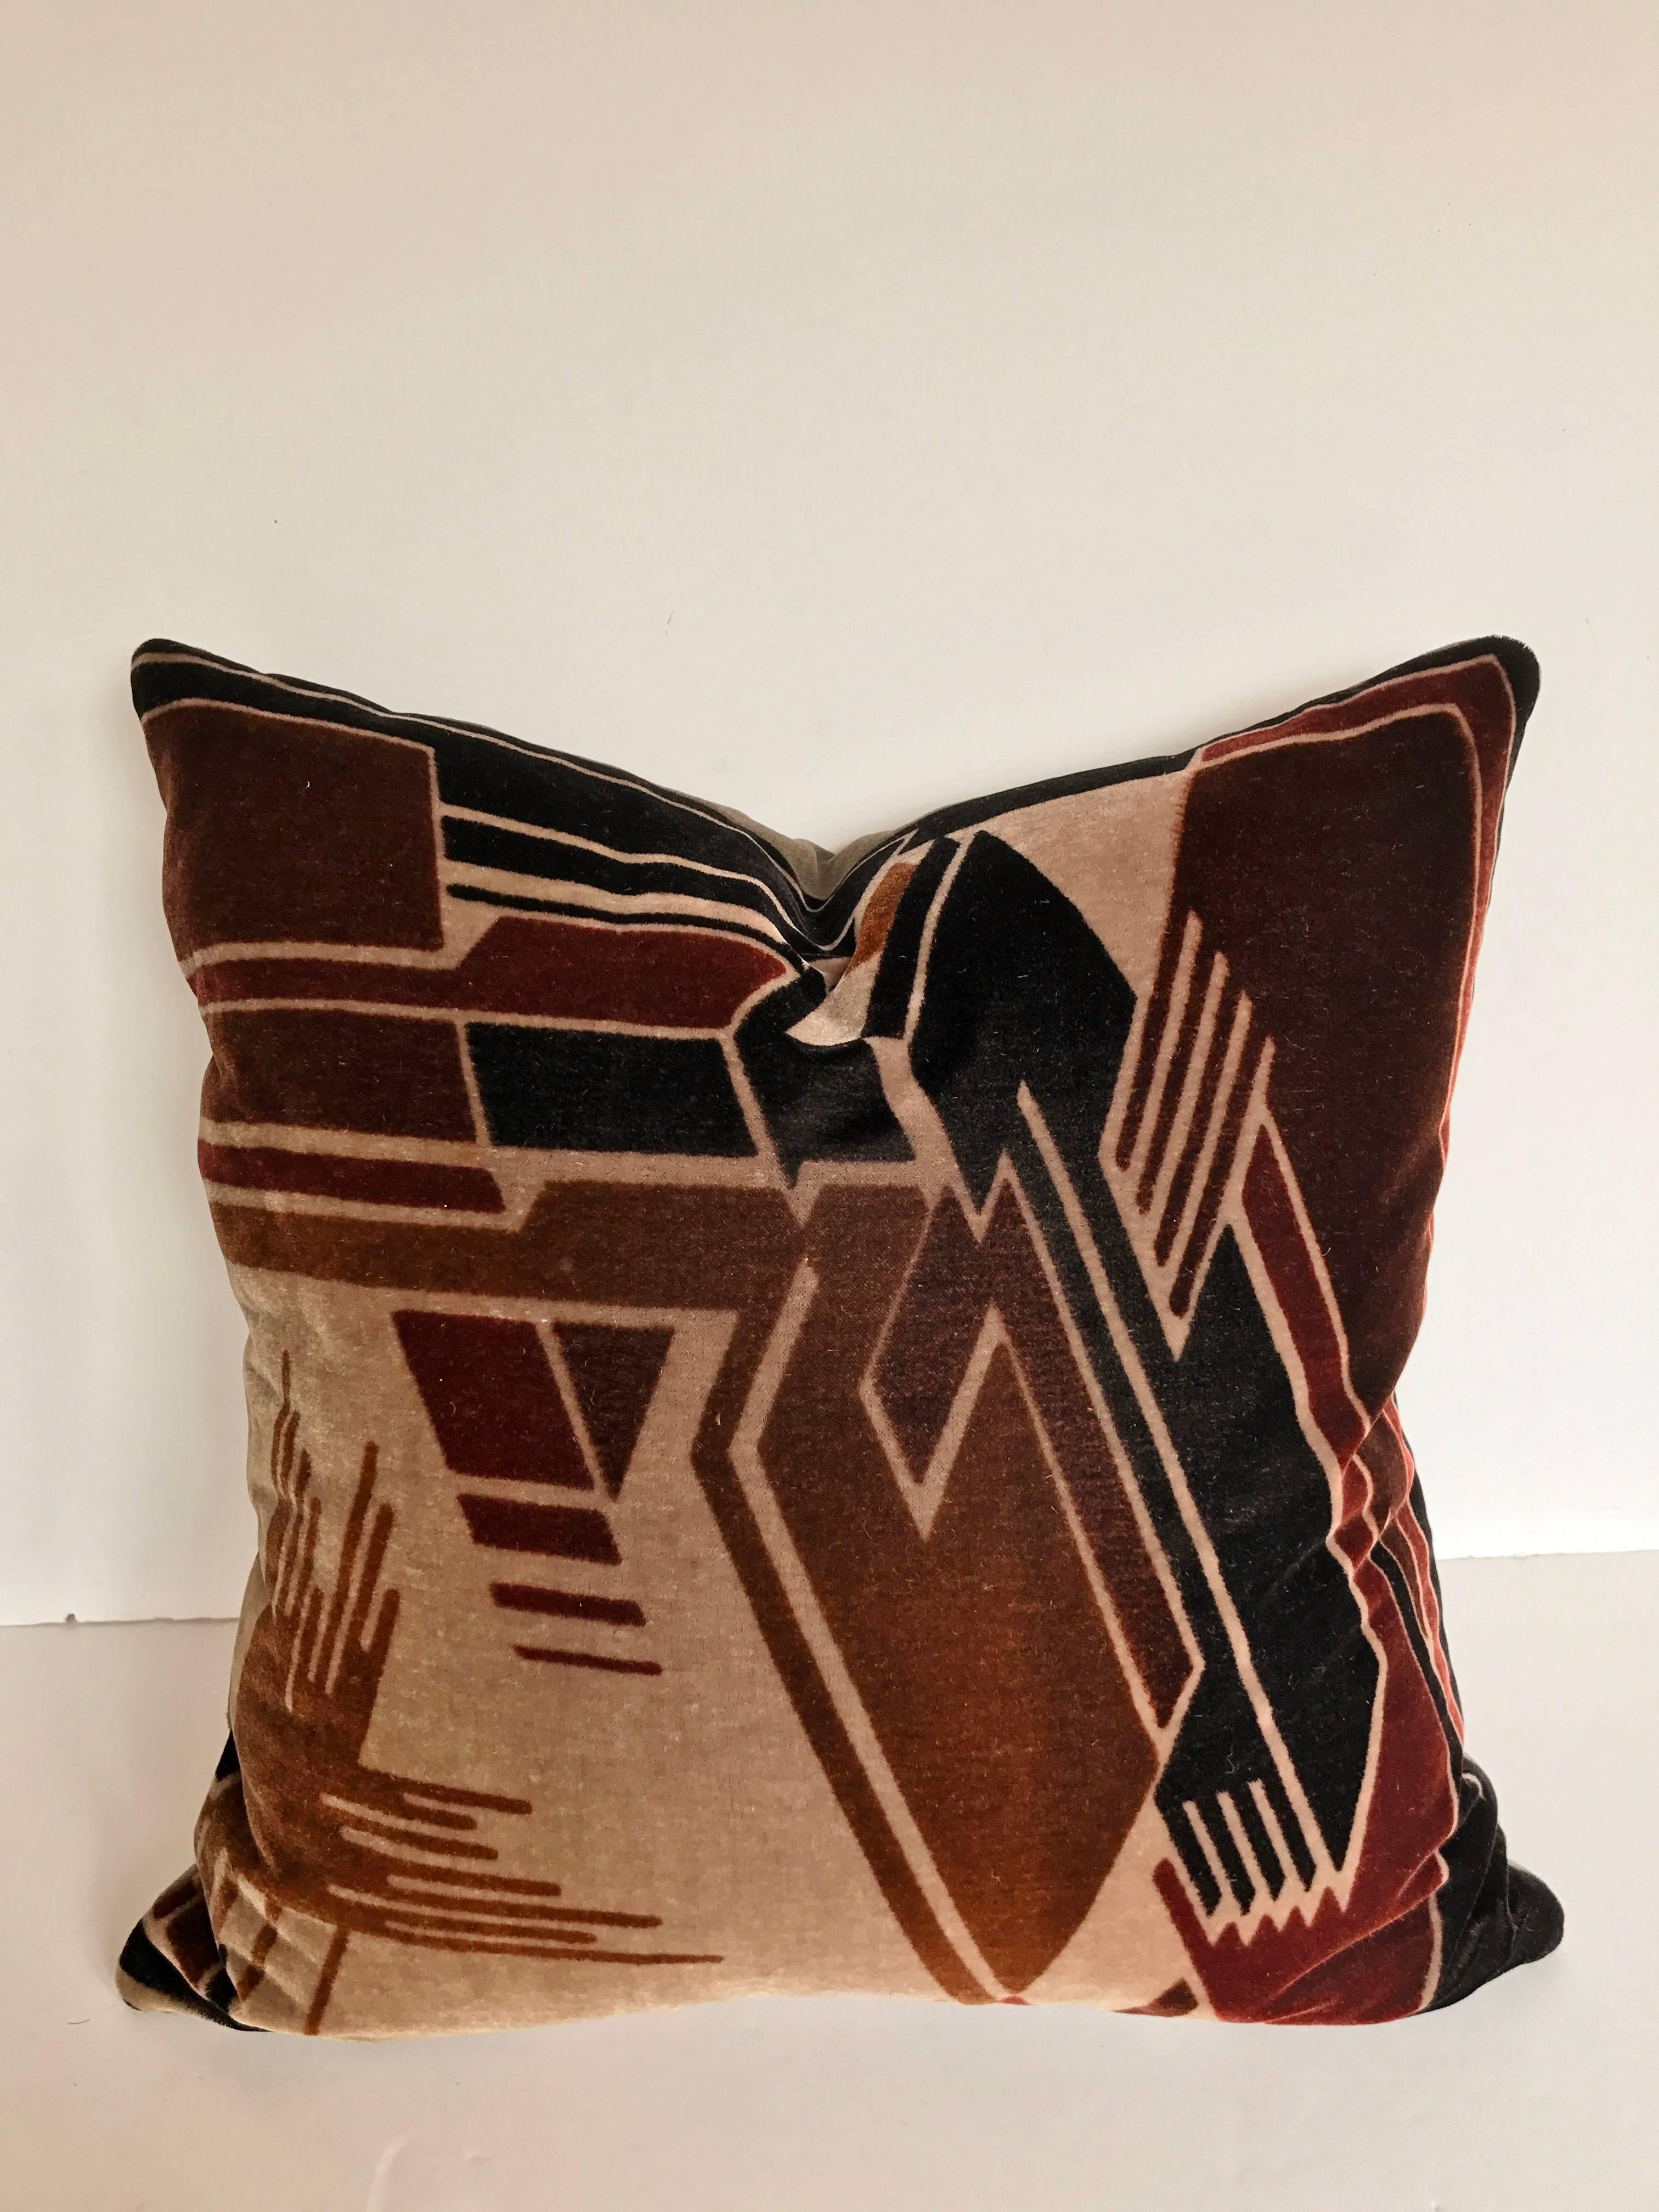 Custom pillow cut from a rare hand blocked mohair Amsterdam School Textile, Netherlands, circa 1915-1927. Mohair is soft and lustrous with a strong deco design. Pillow is backed in velvet, filled with an insert of 50/50 down and feathers and